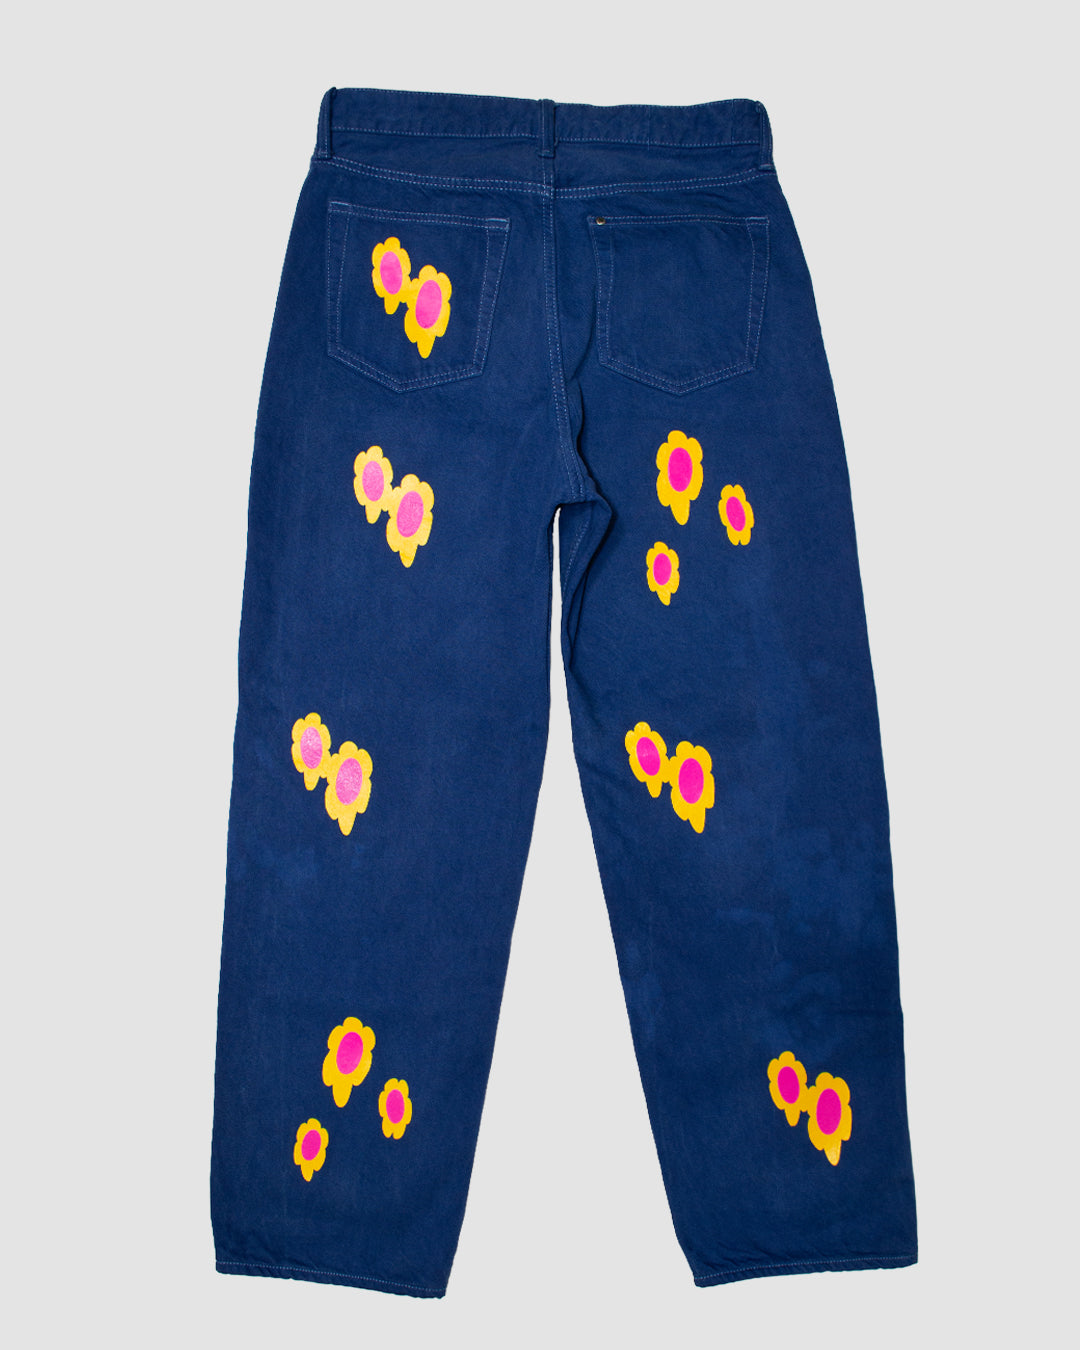 Daproxen™ Daisy Jeans (Dyed)